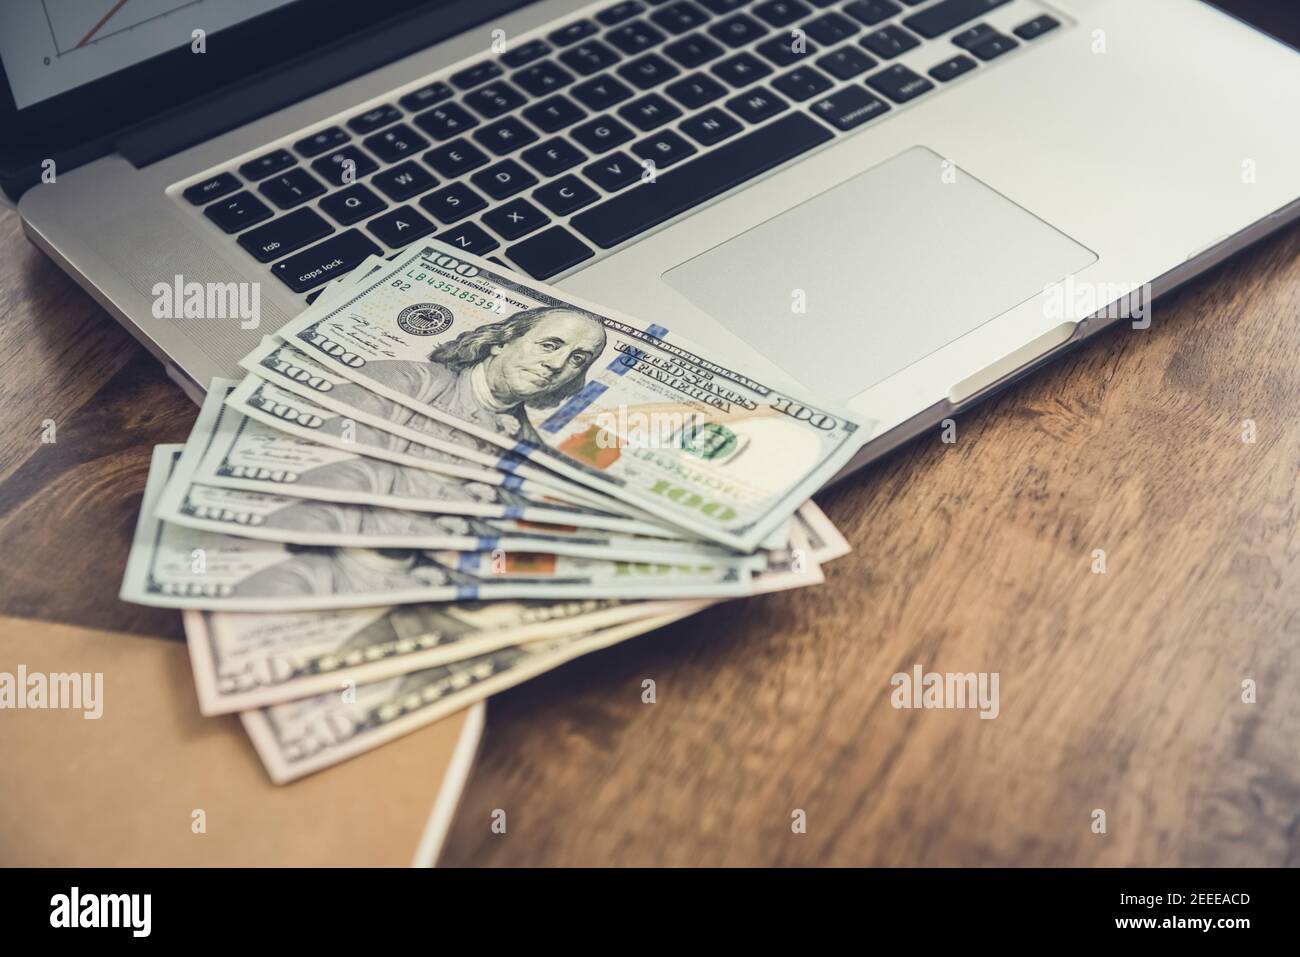 Money, US dollar bills, on laptop computer at working table - investment and financial management concepts Stock Photo